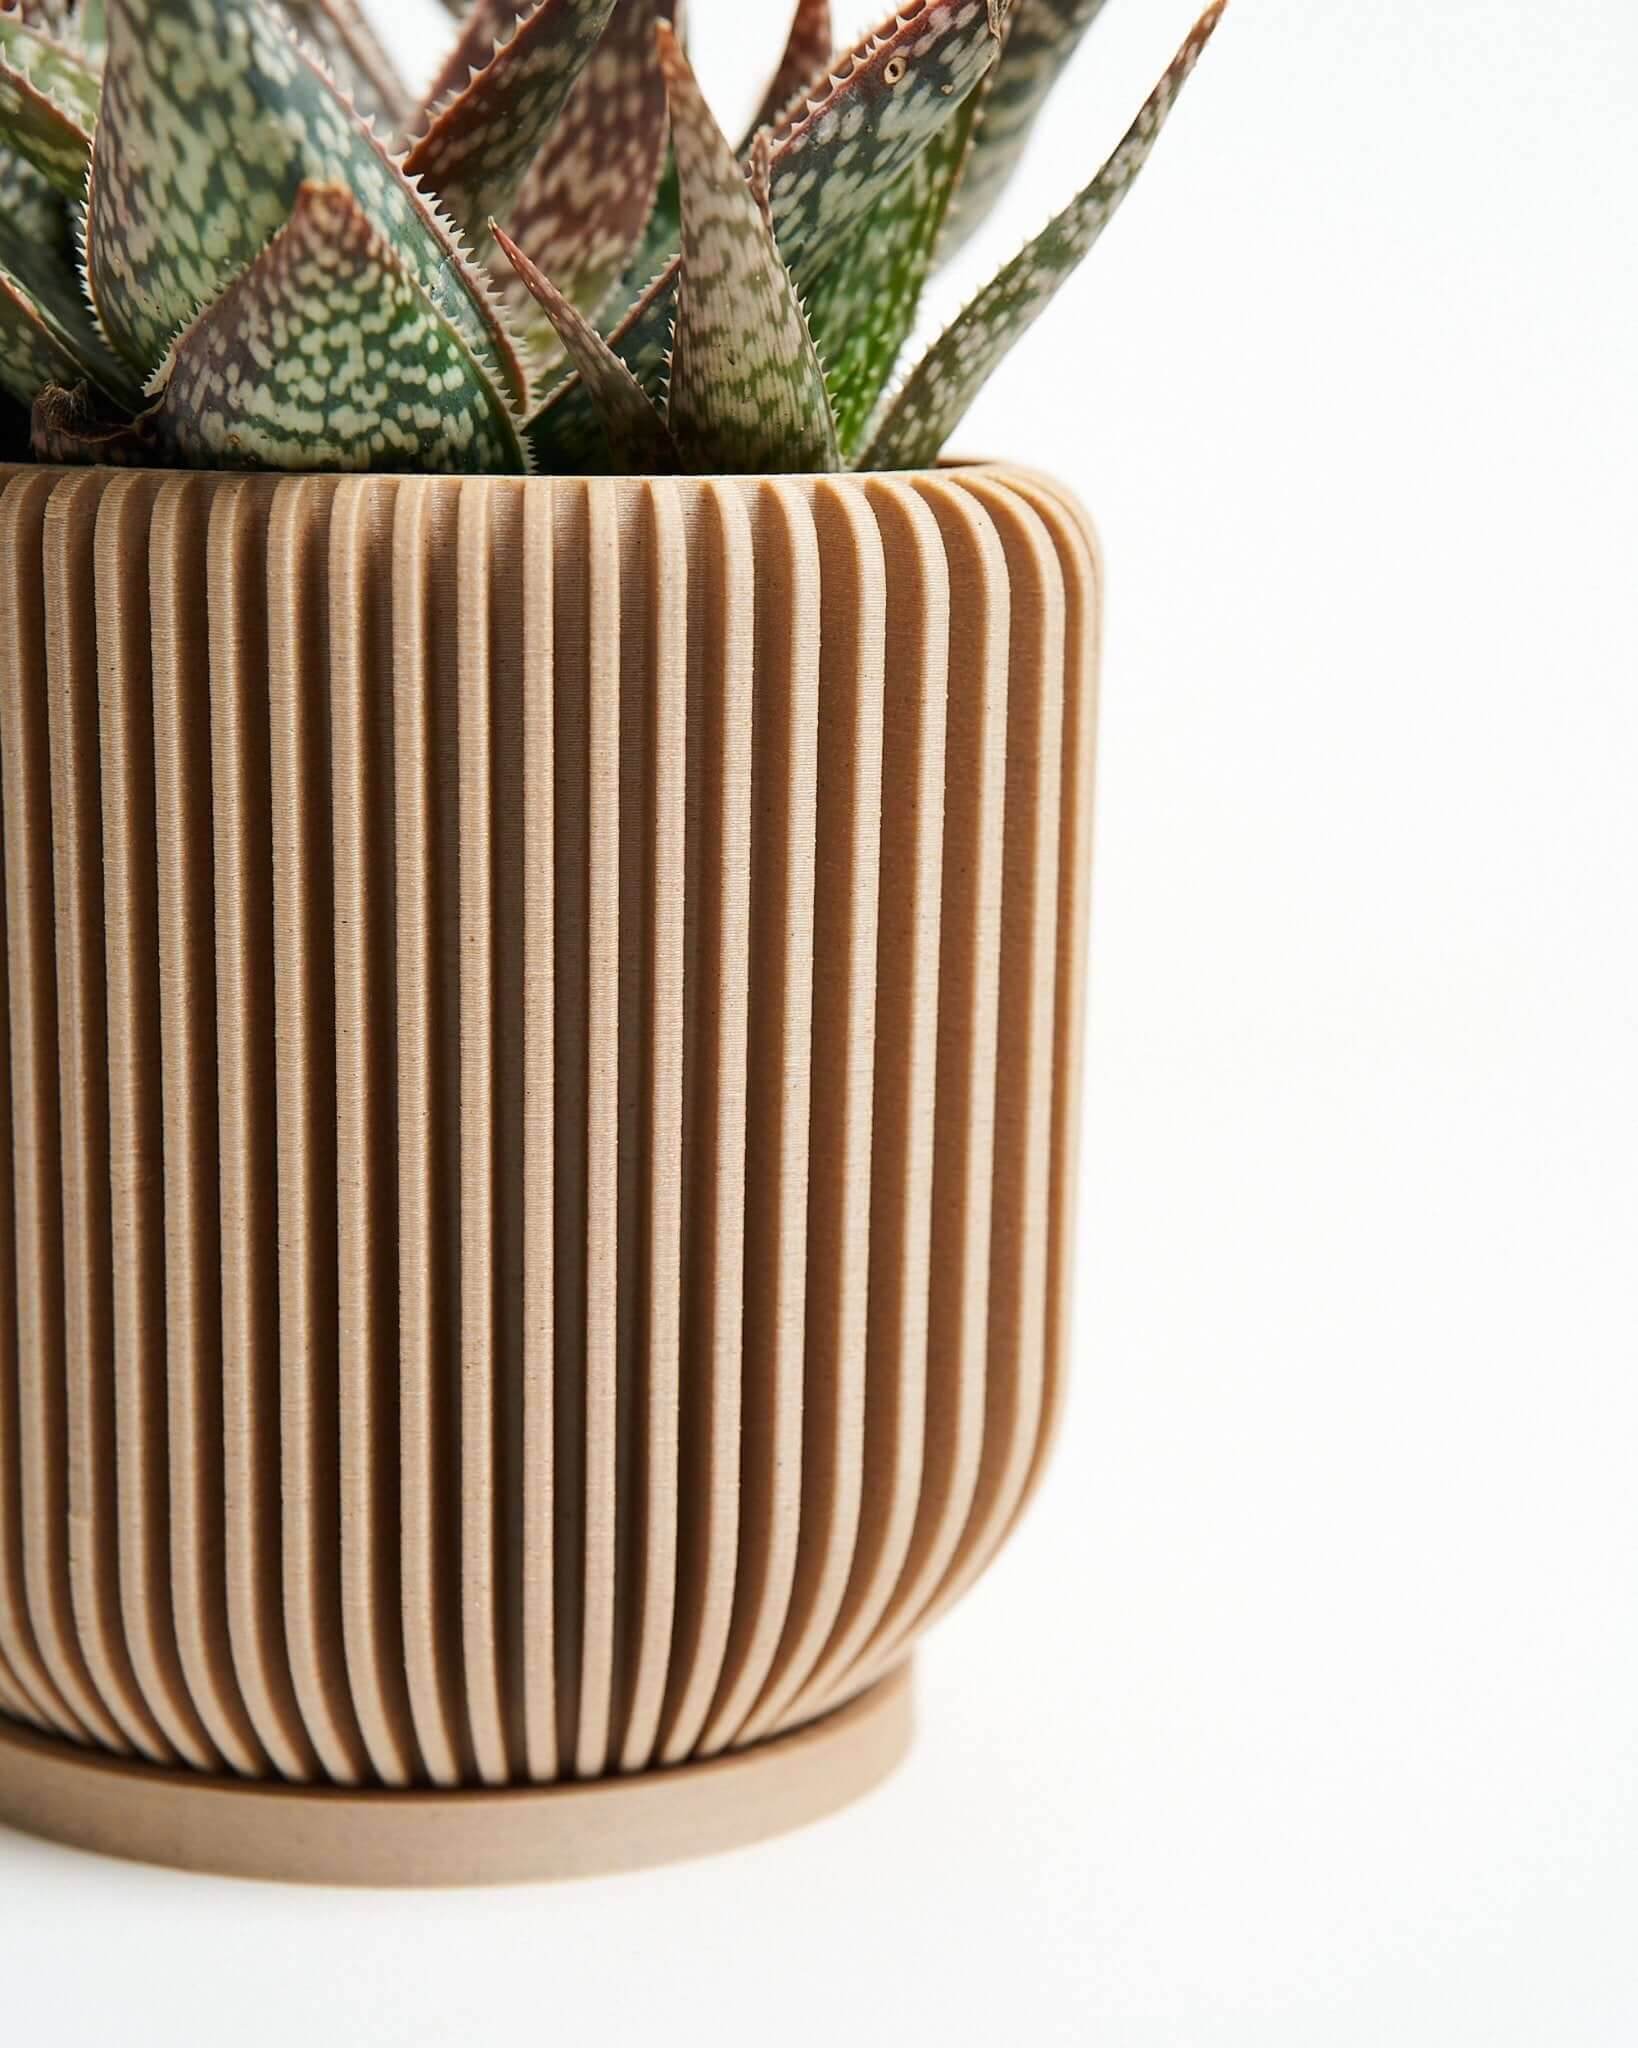 A beige planter pot. This is one of Woodland Pulse's wooden indoor plant pots.